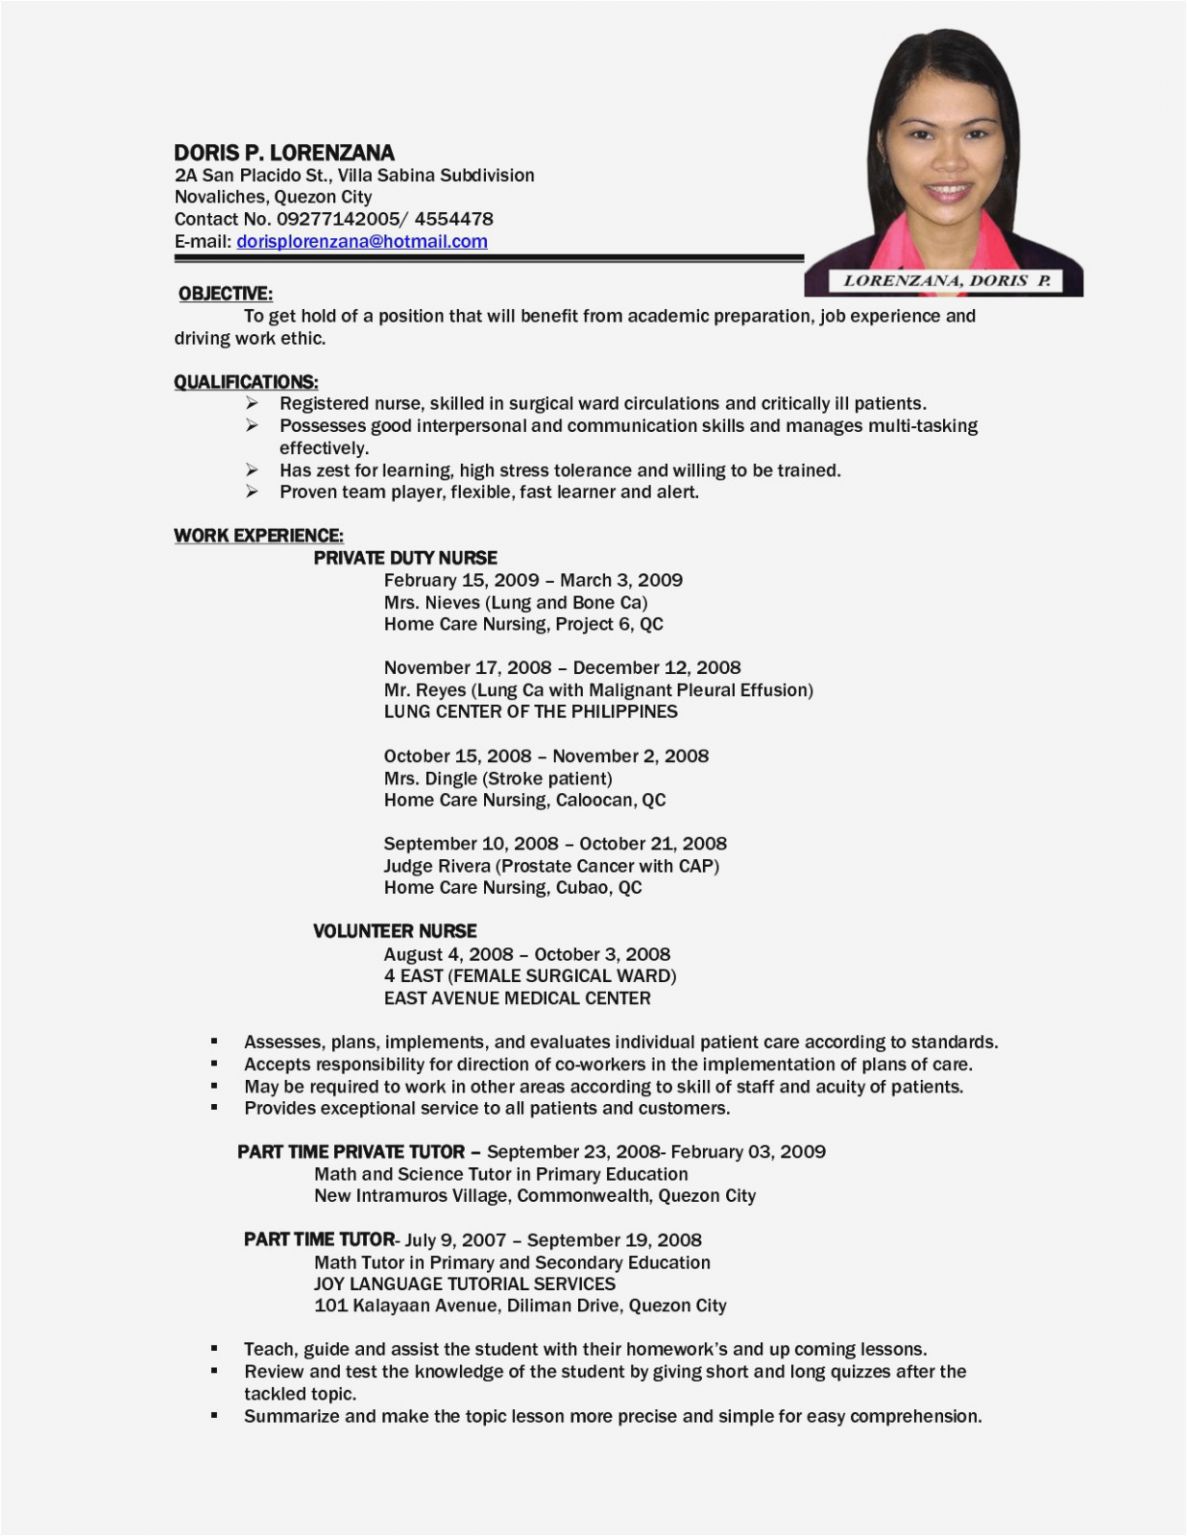 Resume Format Sample For Job Application Philippines This Story Behind Ideal Realty Executives